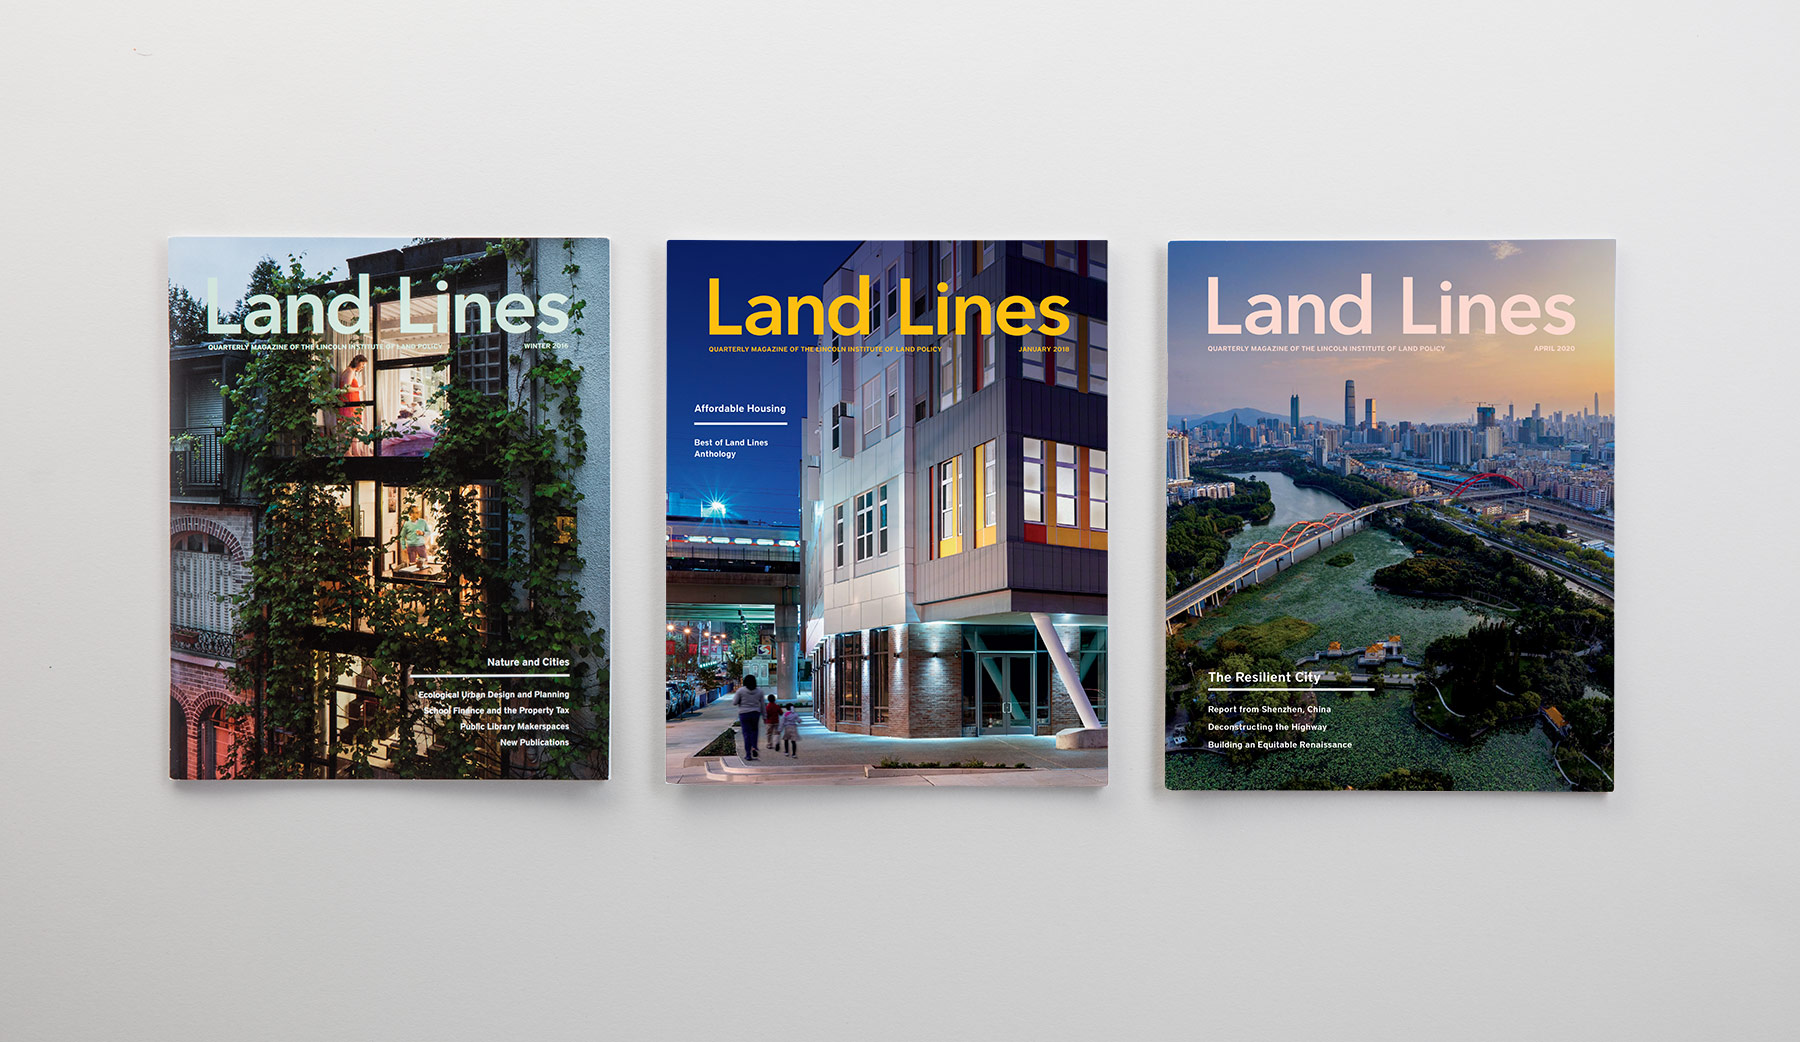 Land Lines magazine covers